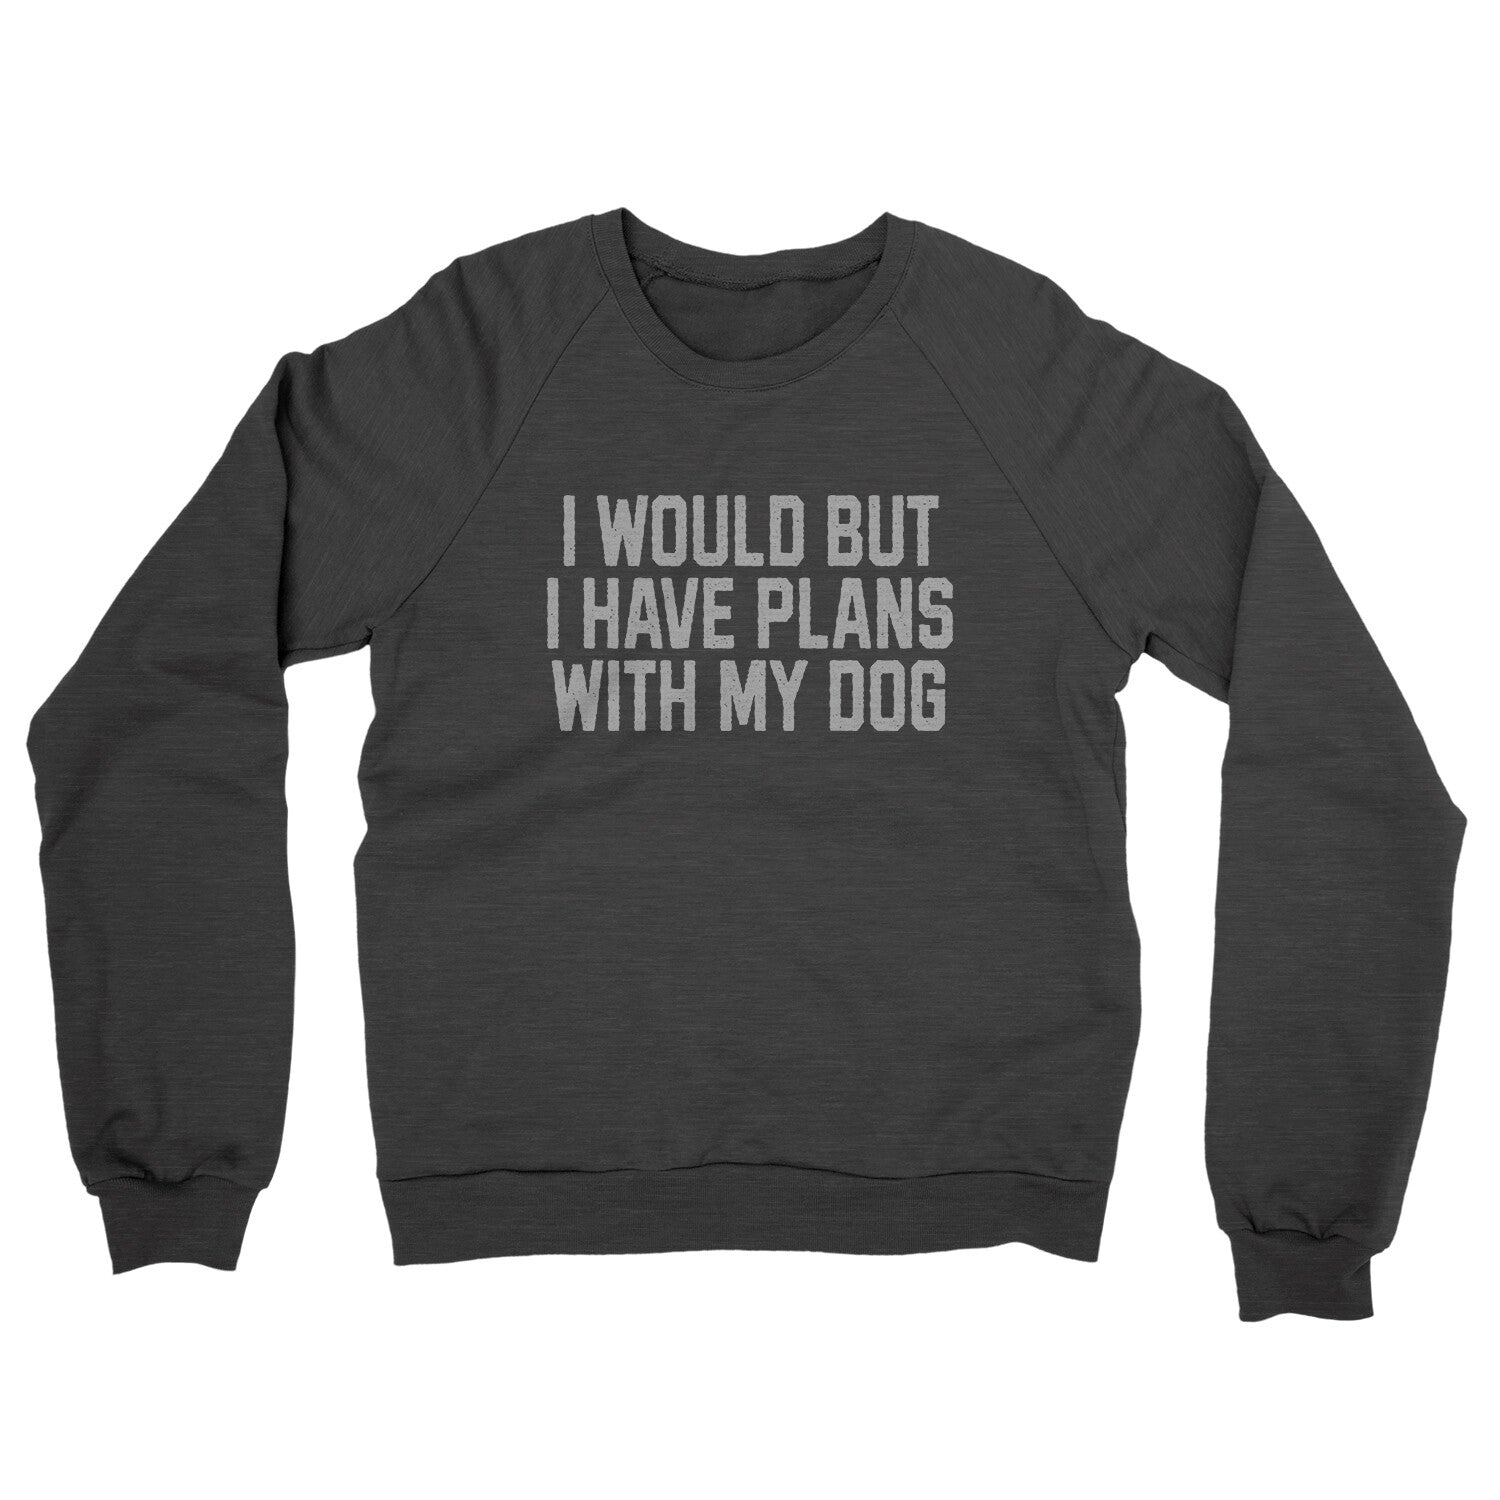 I Would but I Have Plans with My Dog in Charcoal Heather Color